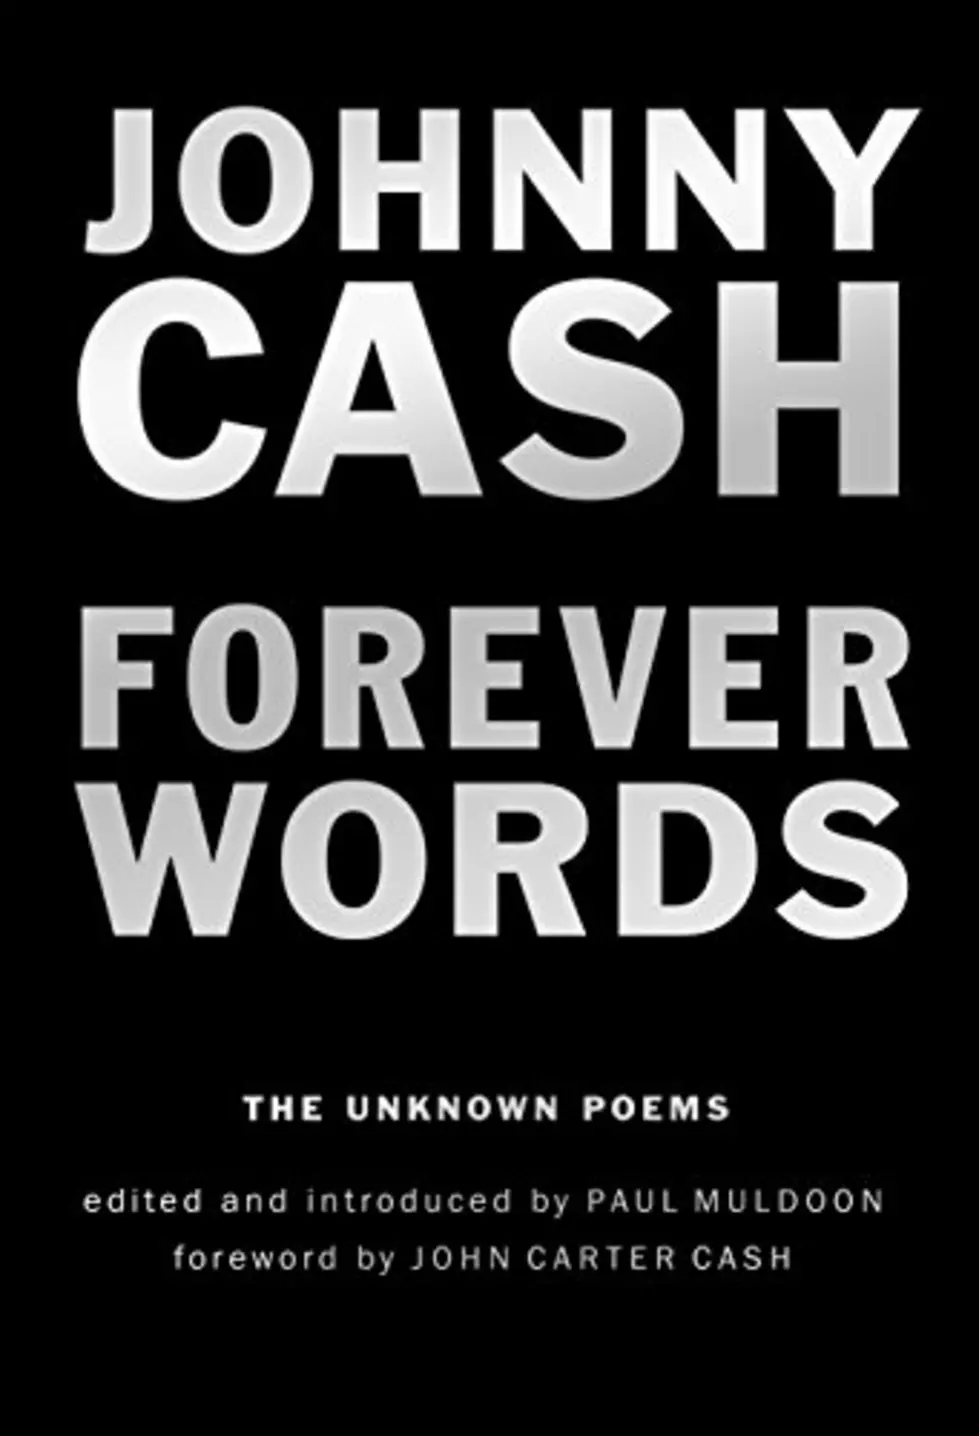 New Book of Unpublished Poems by Johnny Cash